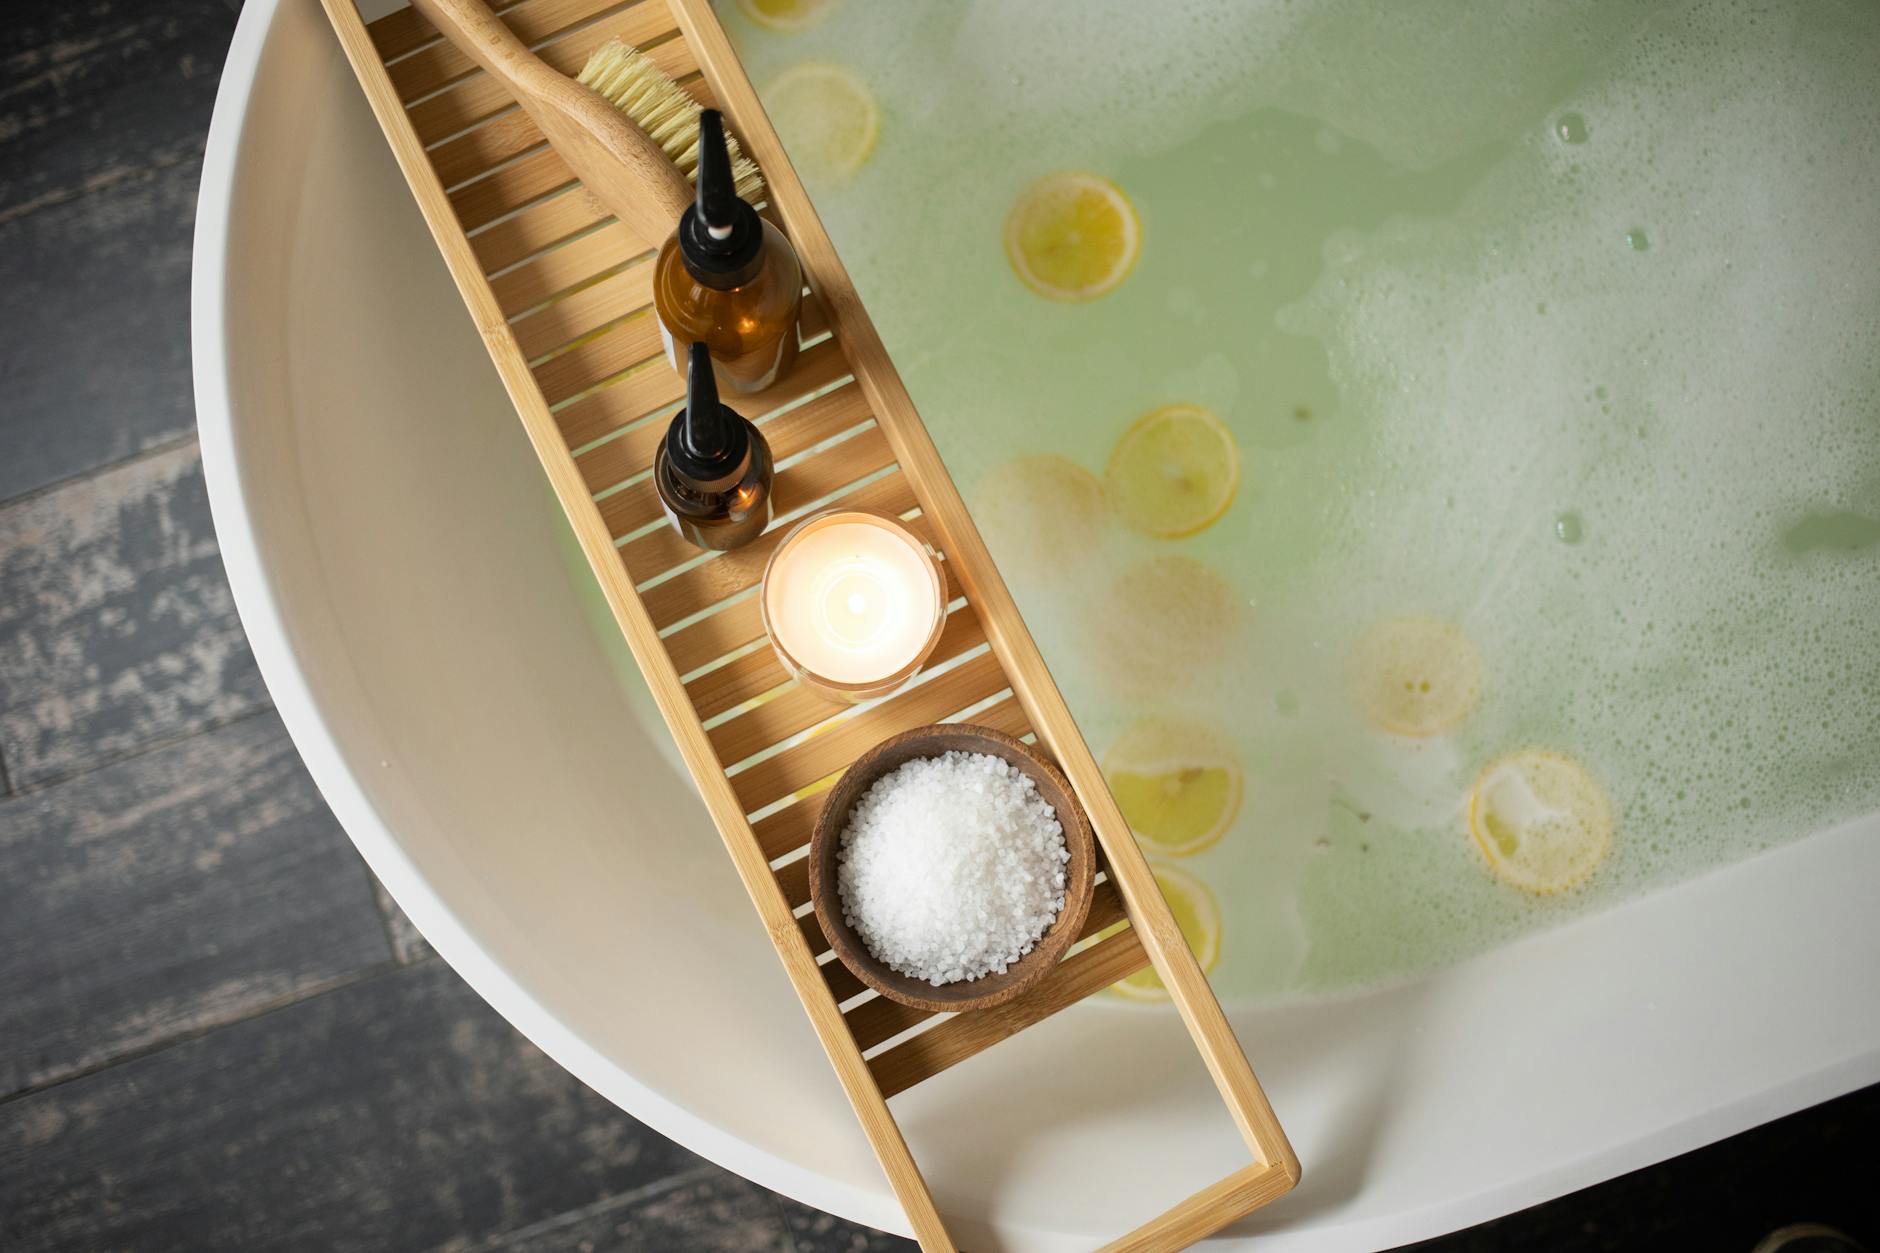 Top view of wooden tray with salt and bottles of cosmetic products placed on white tub with lemon slices on water surface